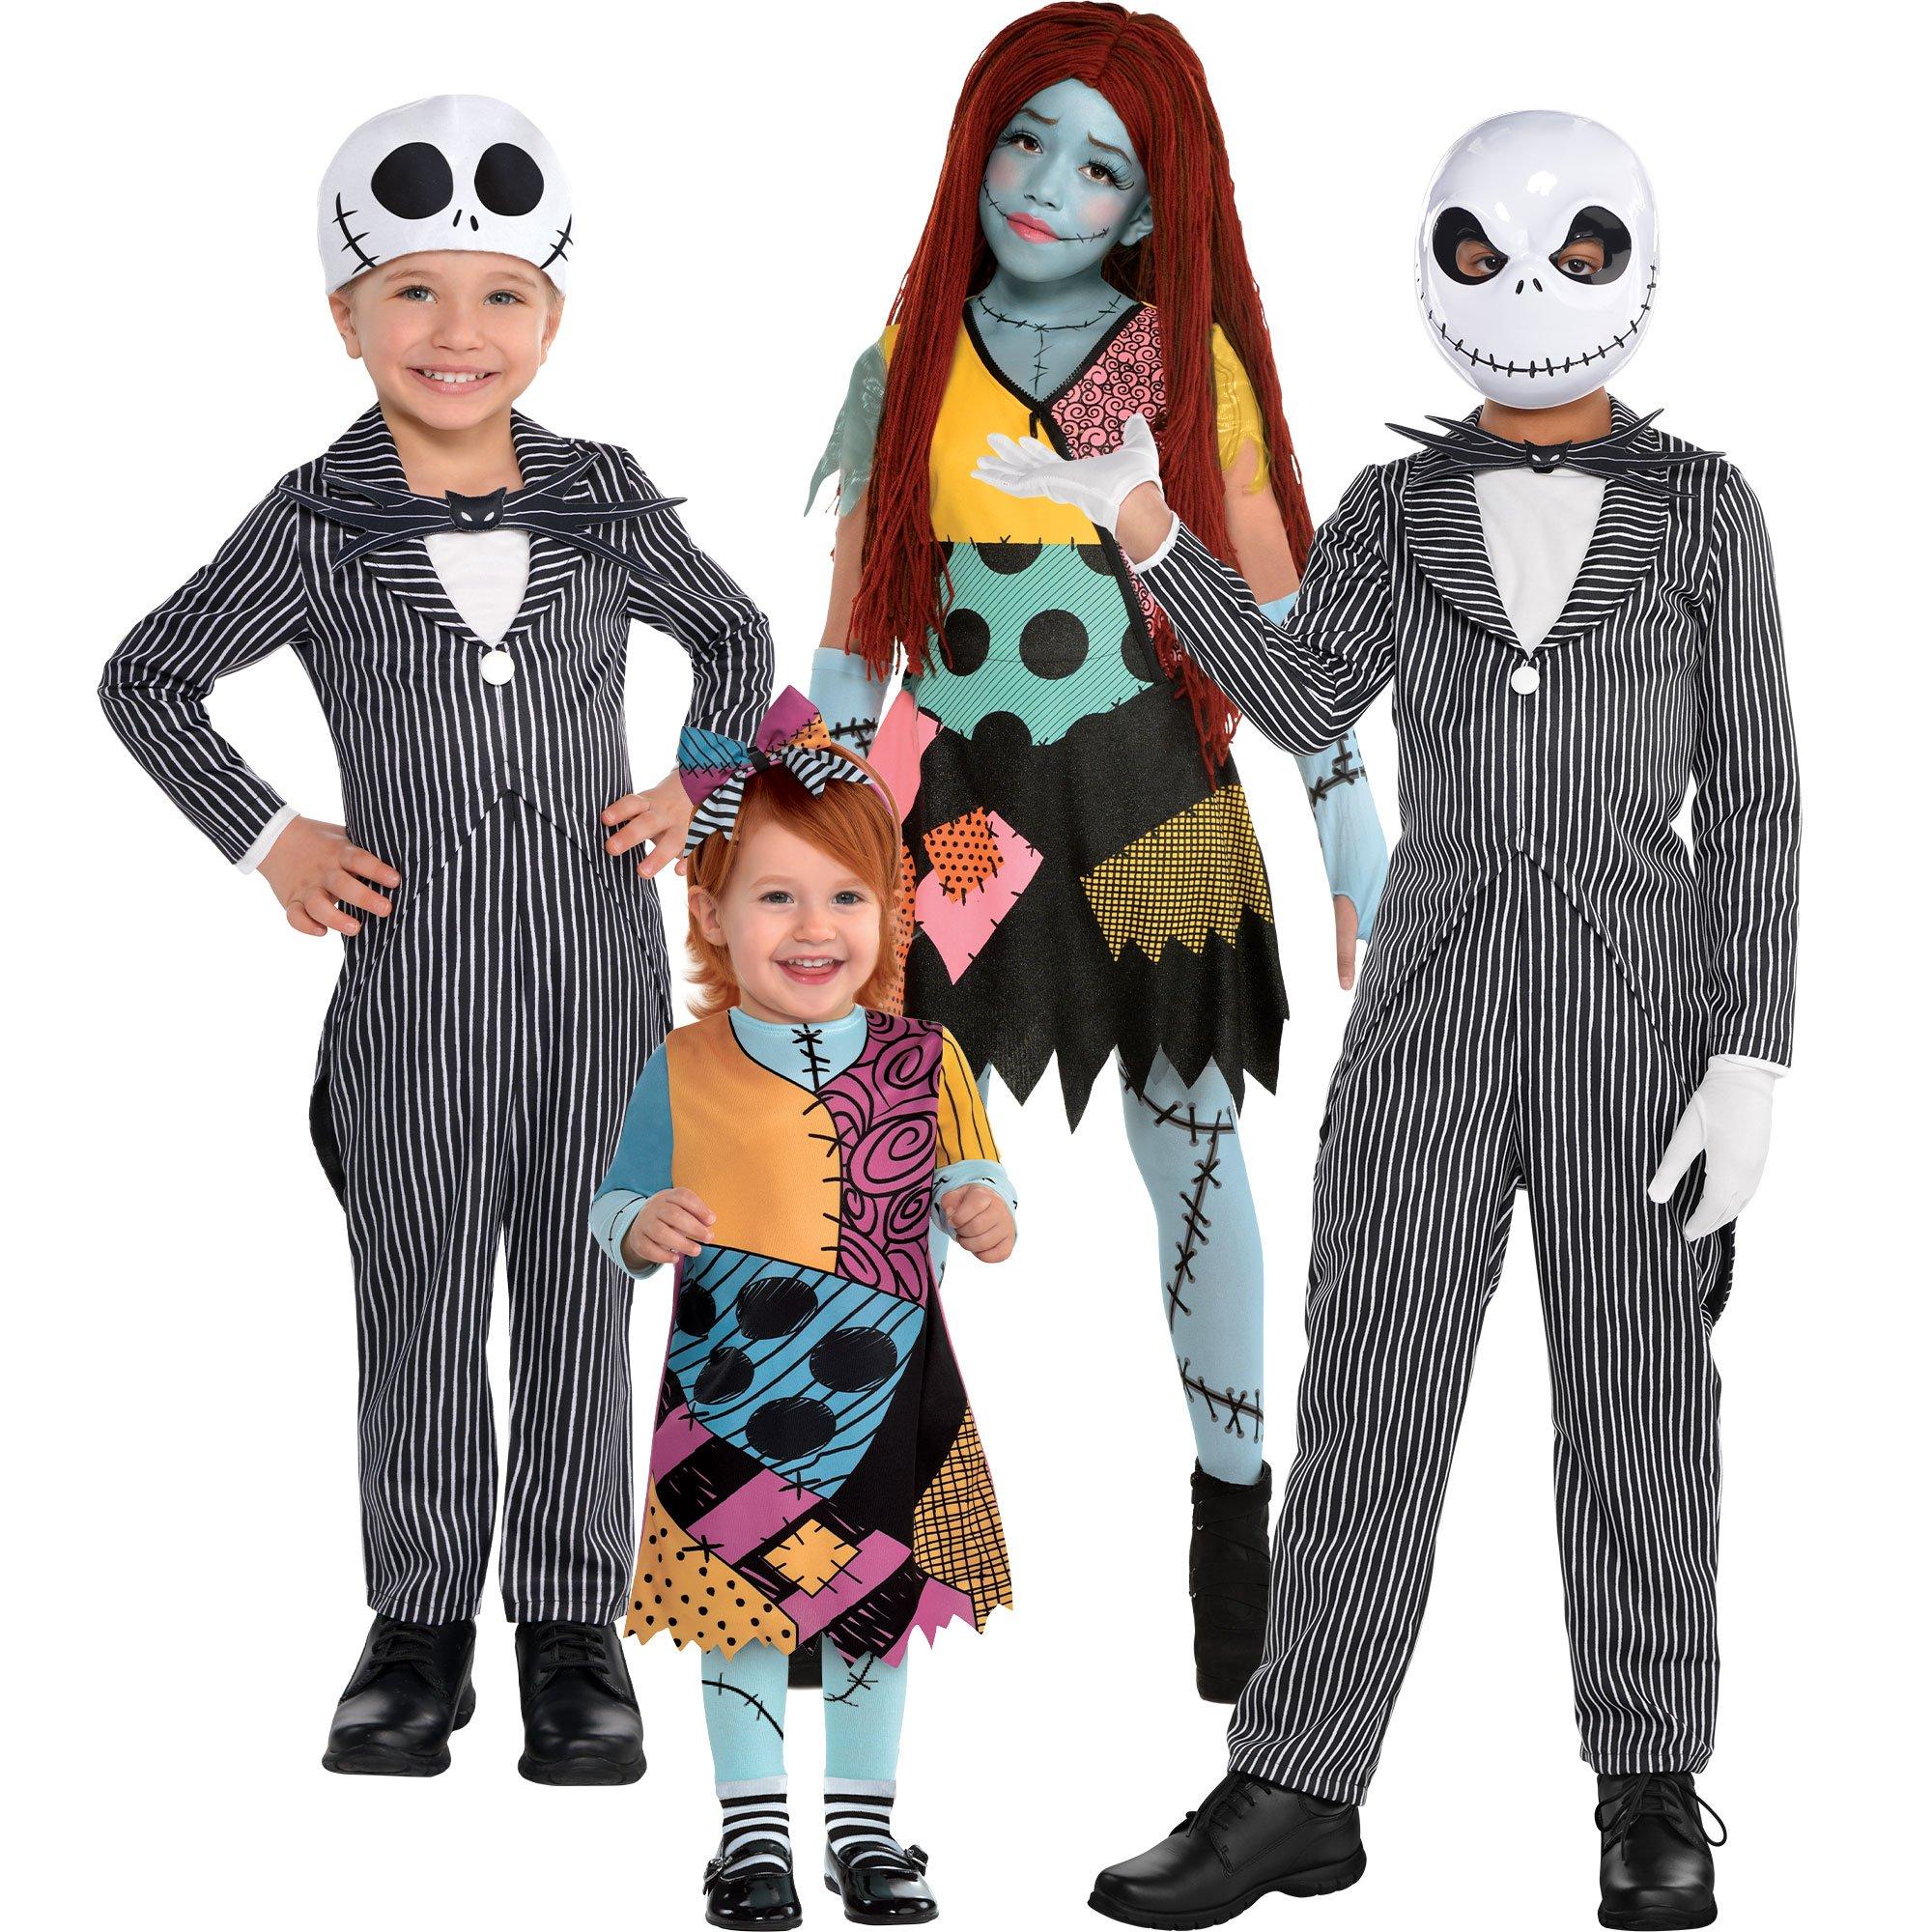 Family Nightmare Before Christmas Costumes - www.inf-inet.com